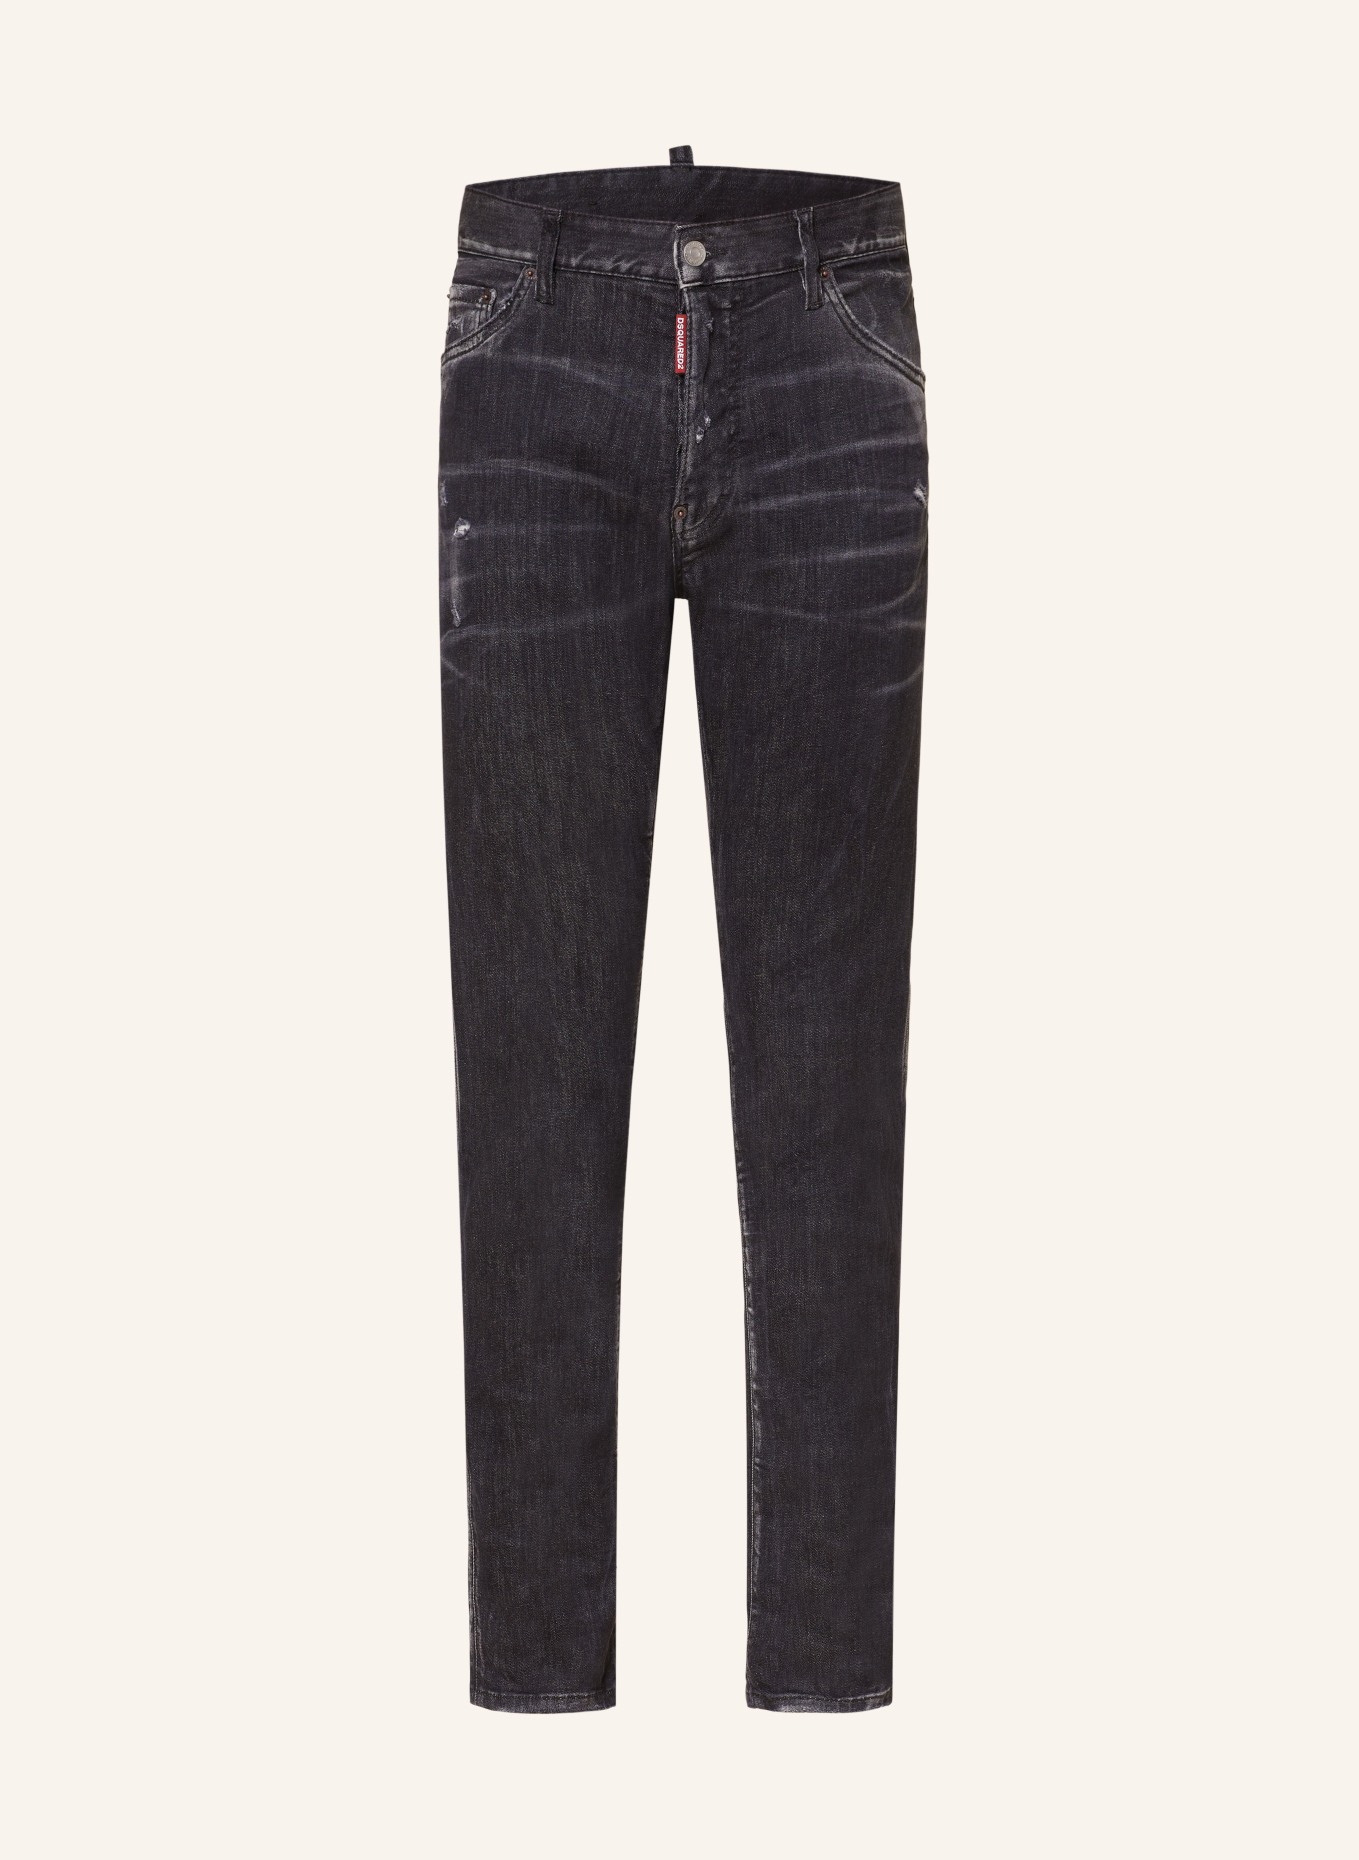 DSQUARED2 Destroyed Jeans COOL GUY Extra Slim Fit, Farbe: 900 BLACK (Bild 1)